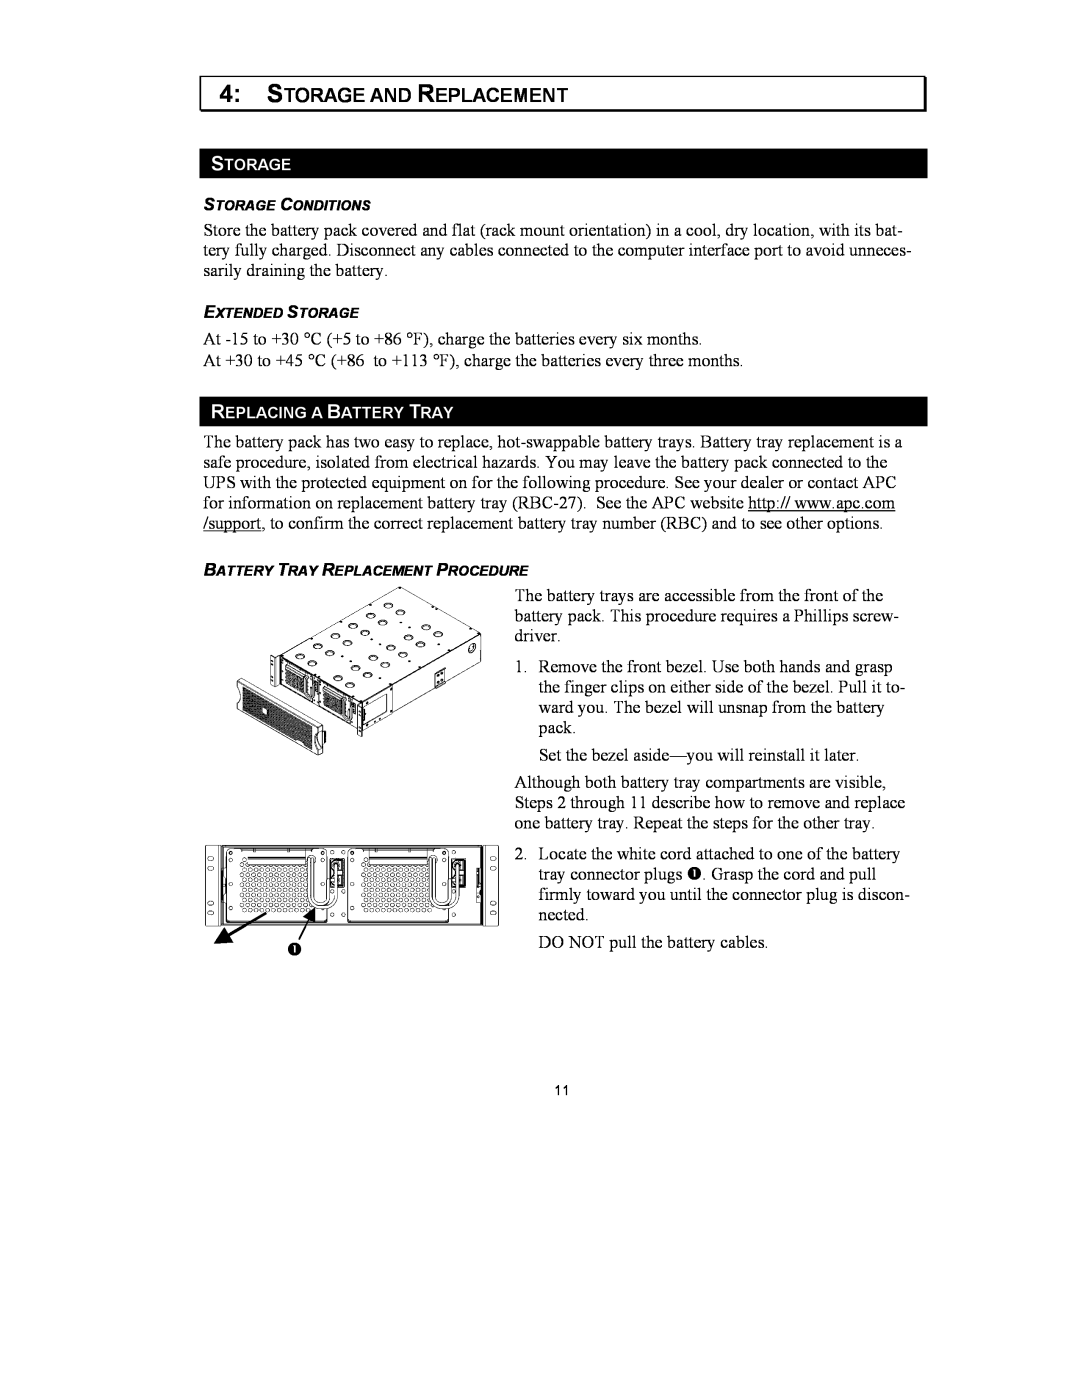 American Power Conversion 3U Rack Mount user manual Storage And Replacement, Replacing A Battery Tray 